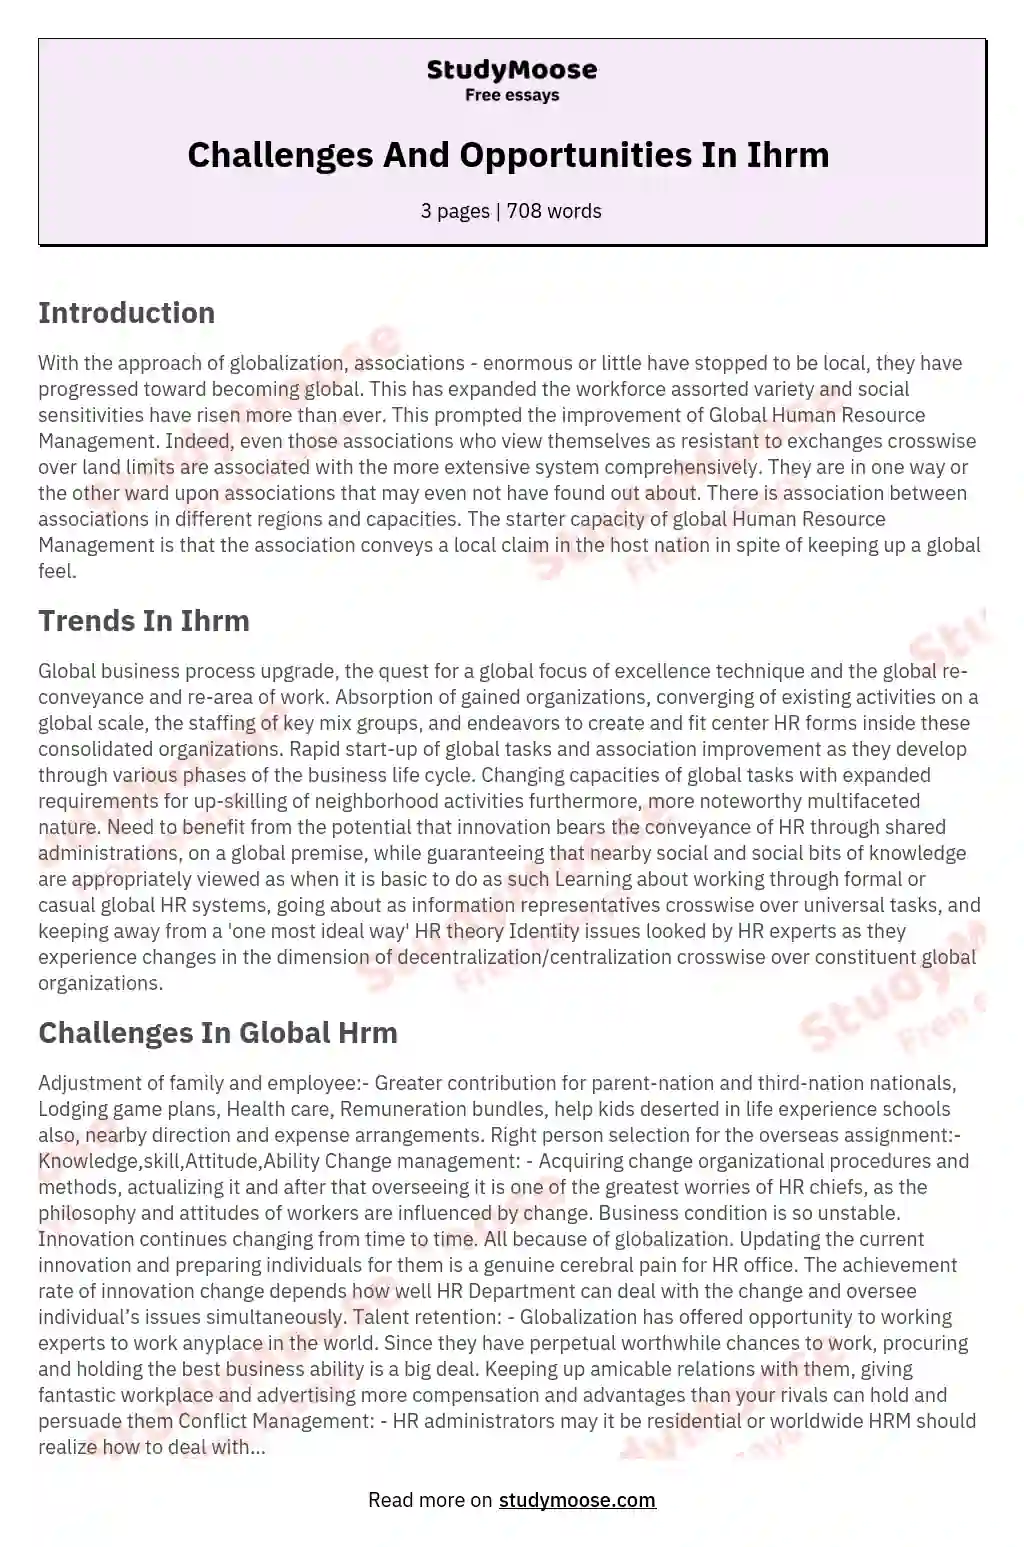 Challenges And Opportunities In Ihrm  essay